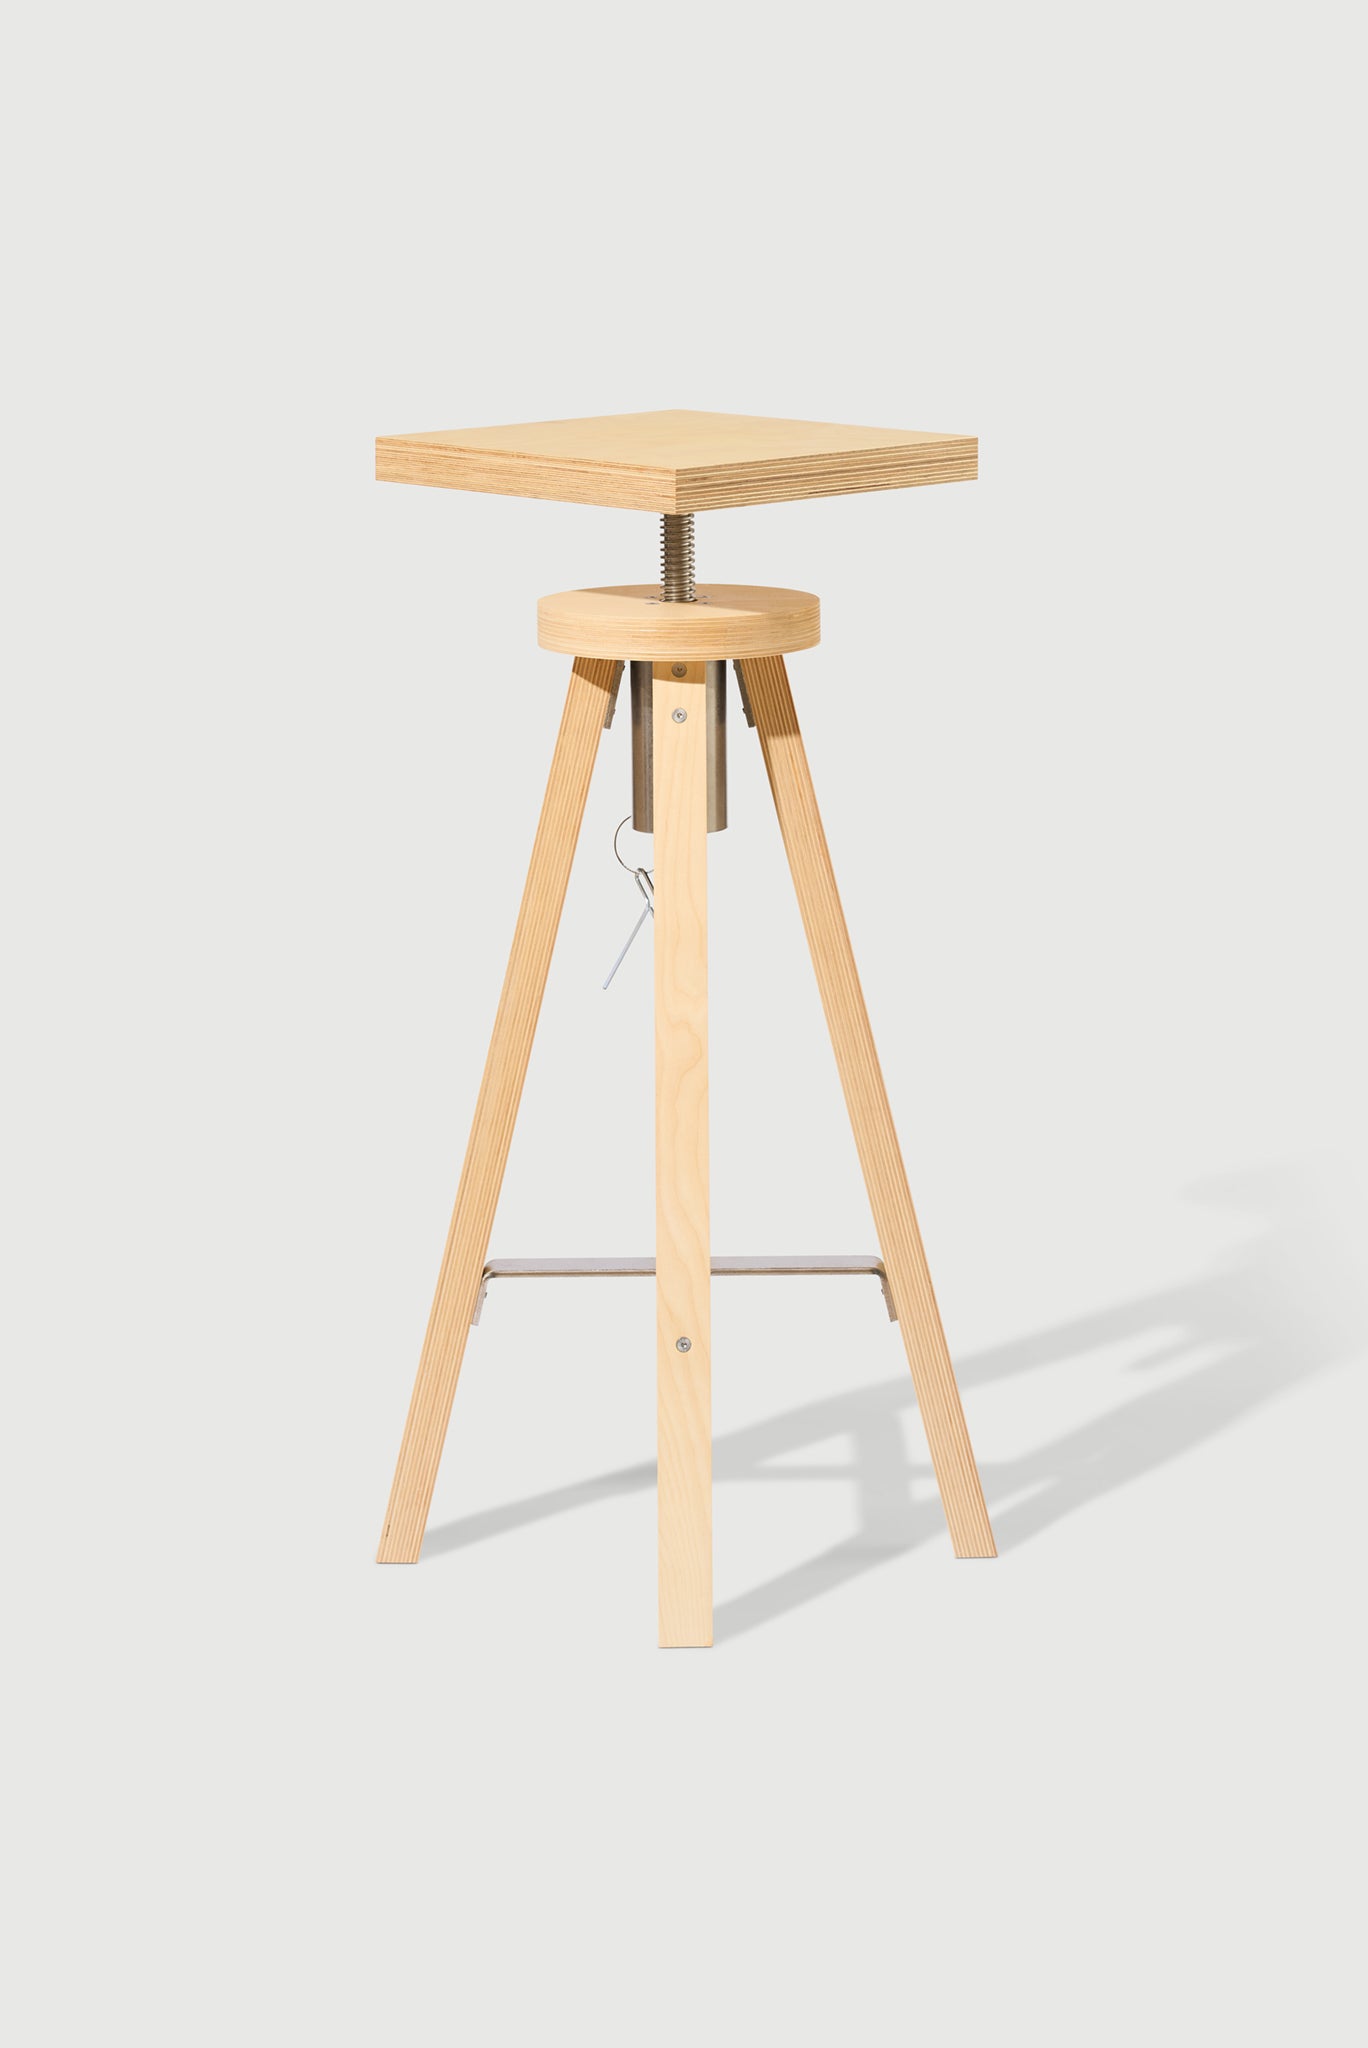 Sculptor's Stand Stool #2.5